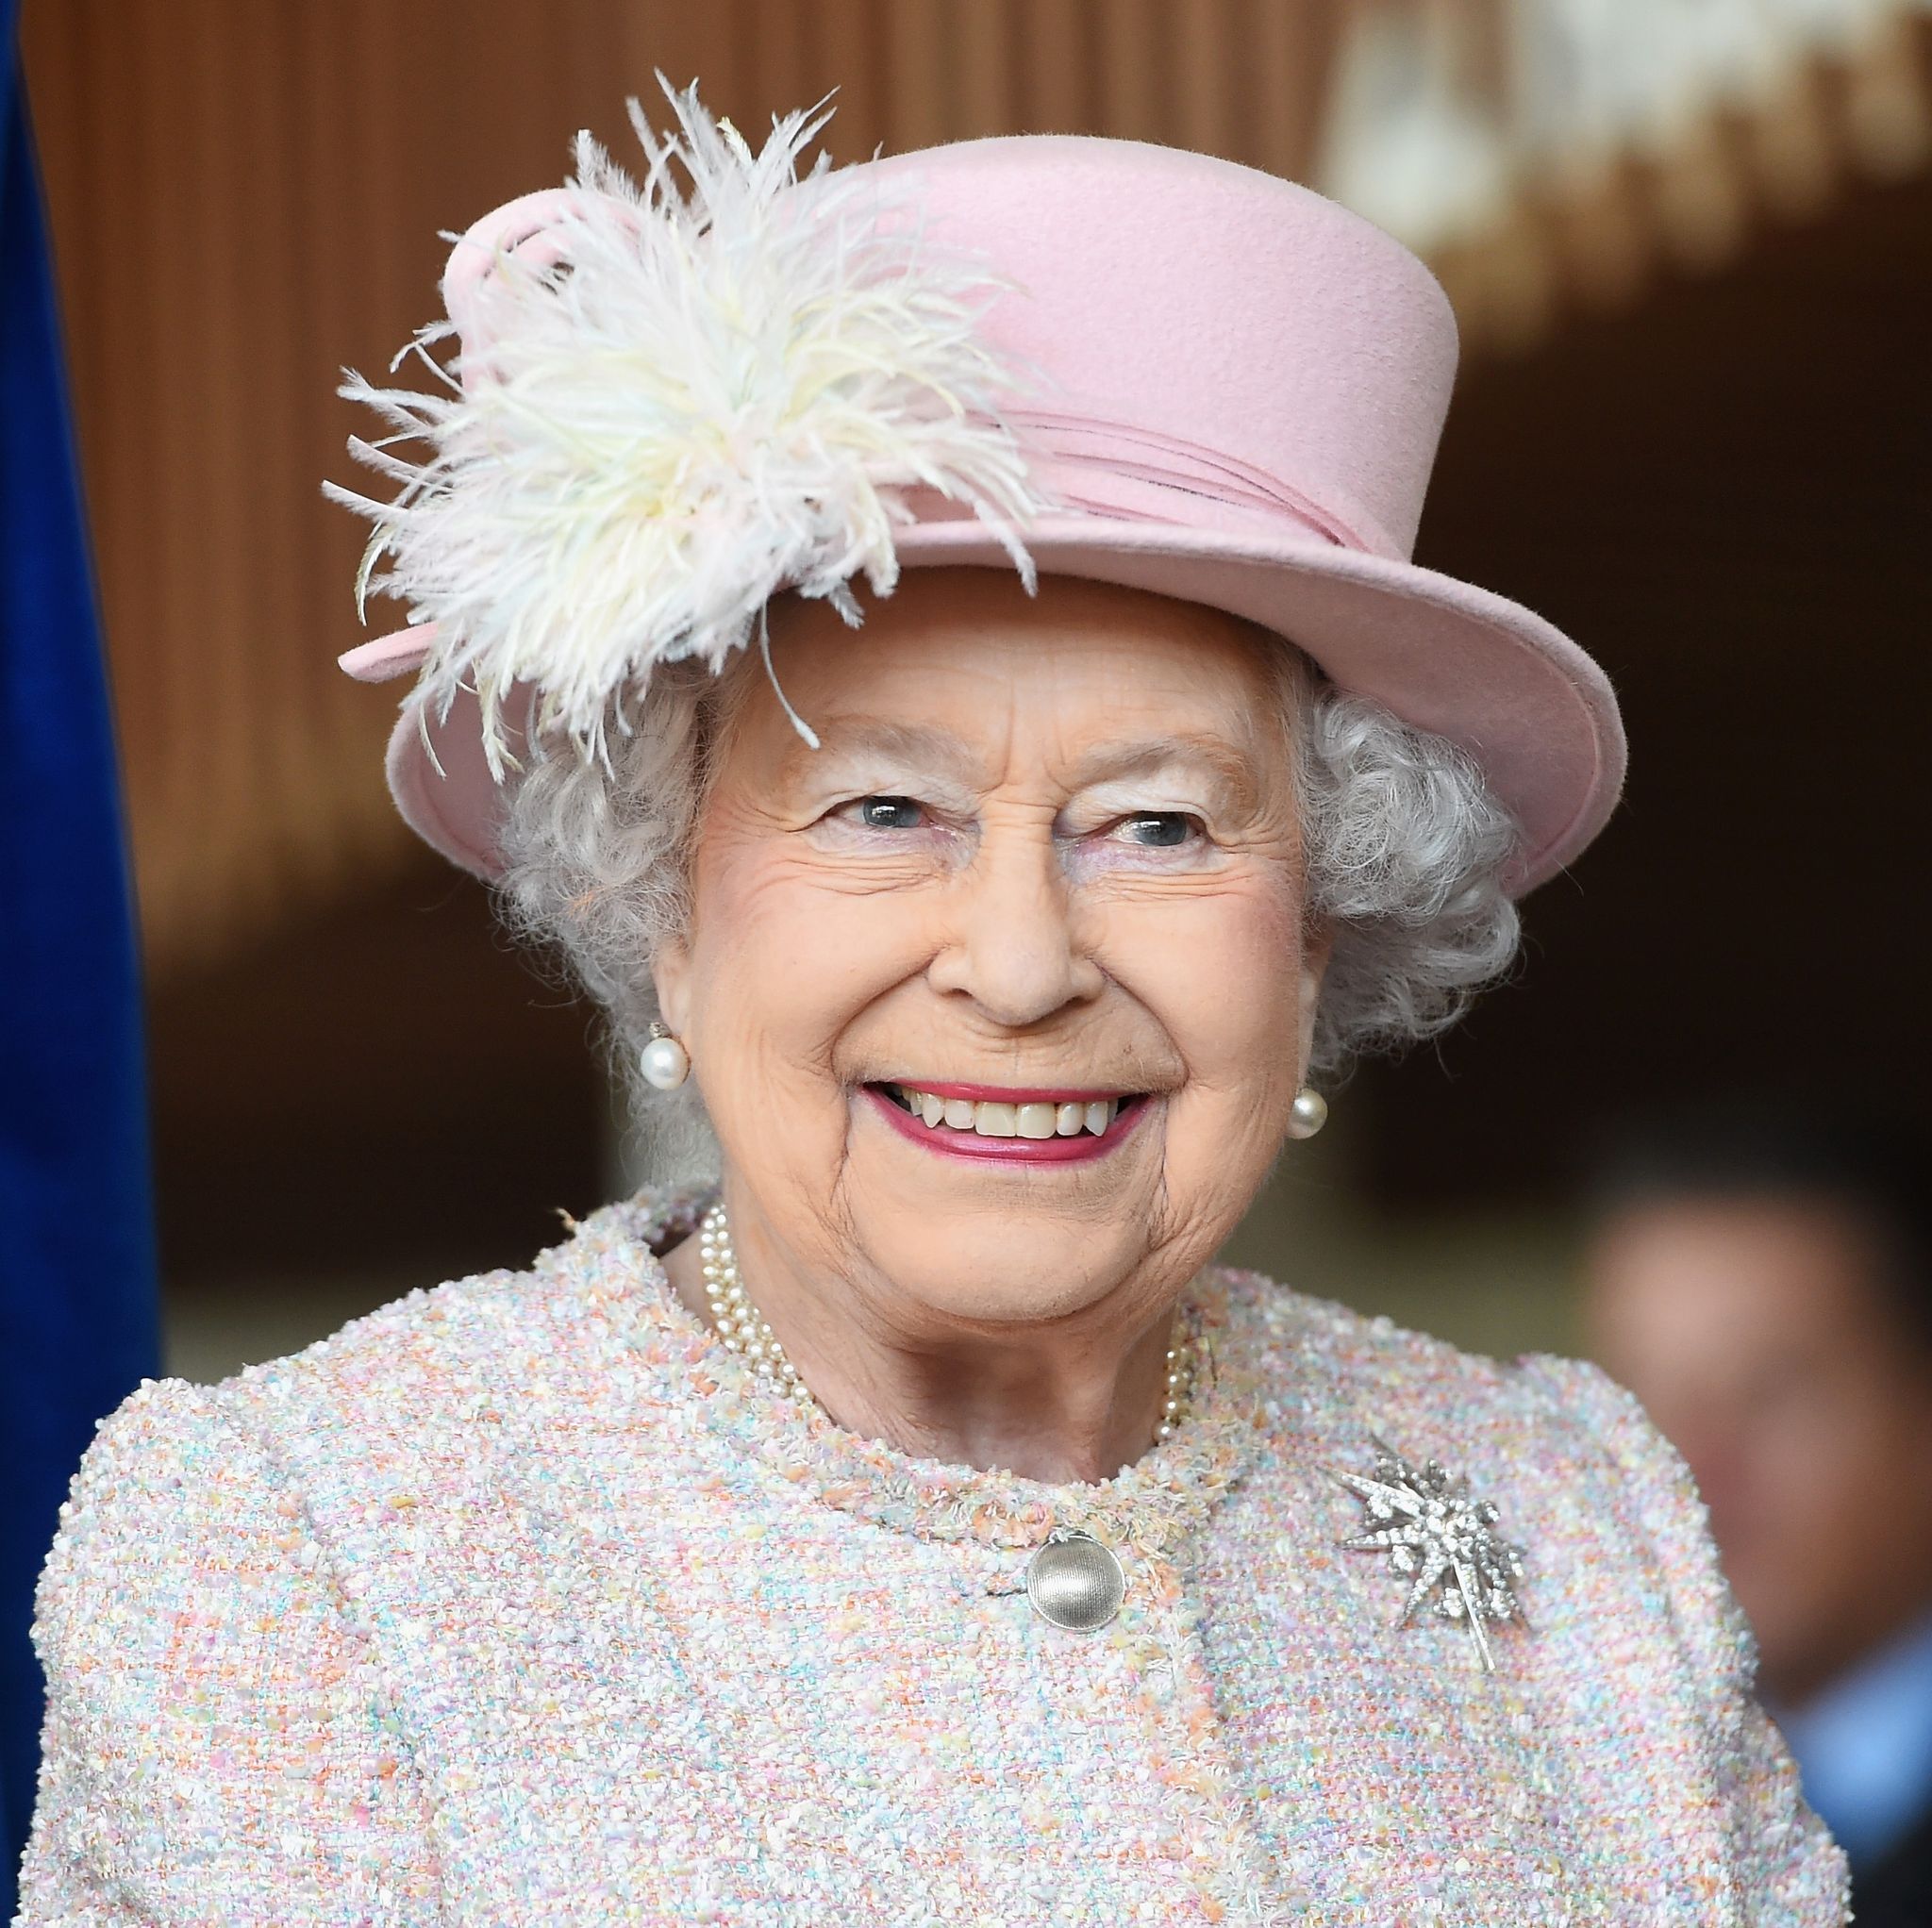 The Queen is hiring a social media manager